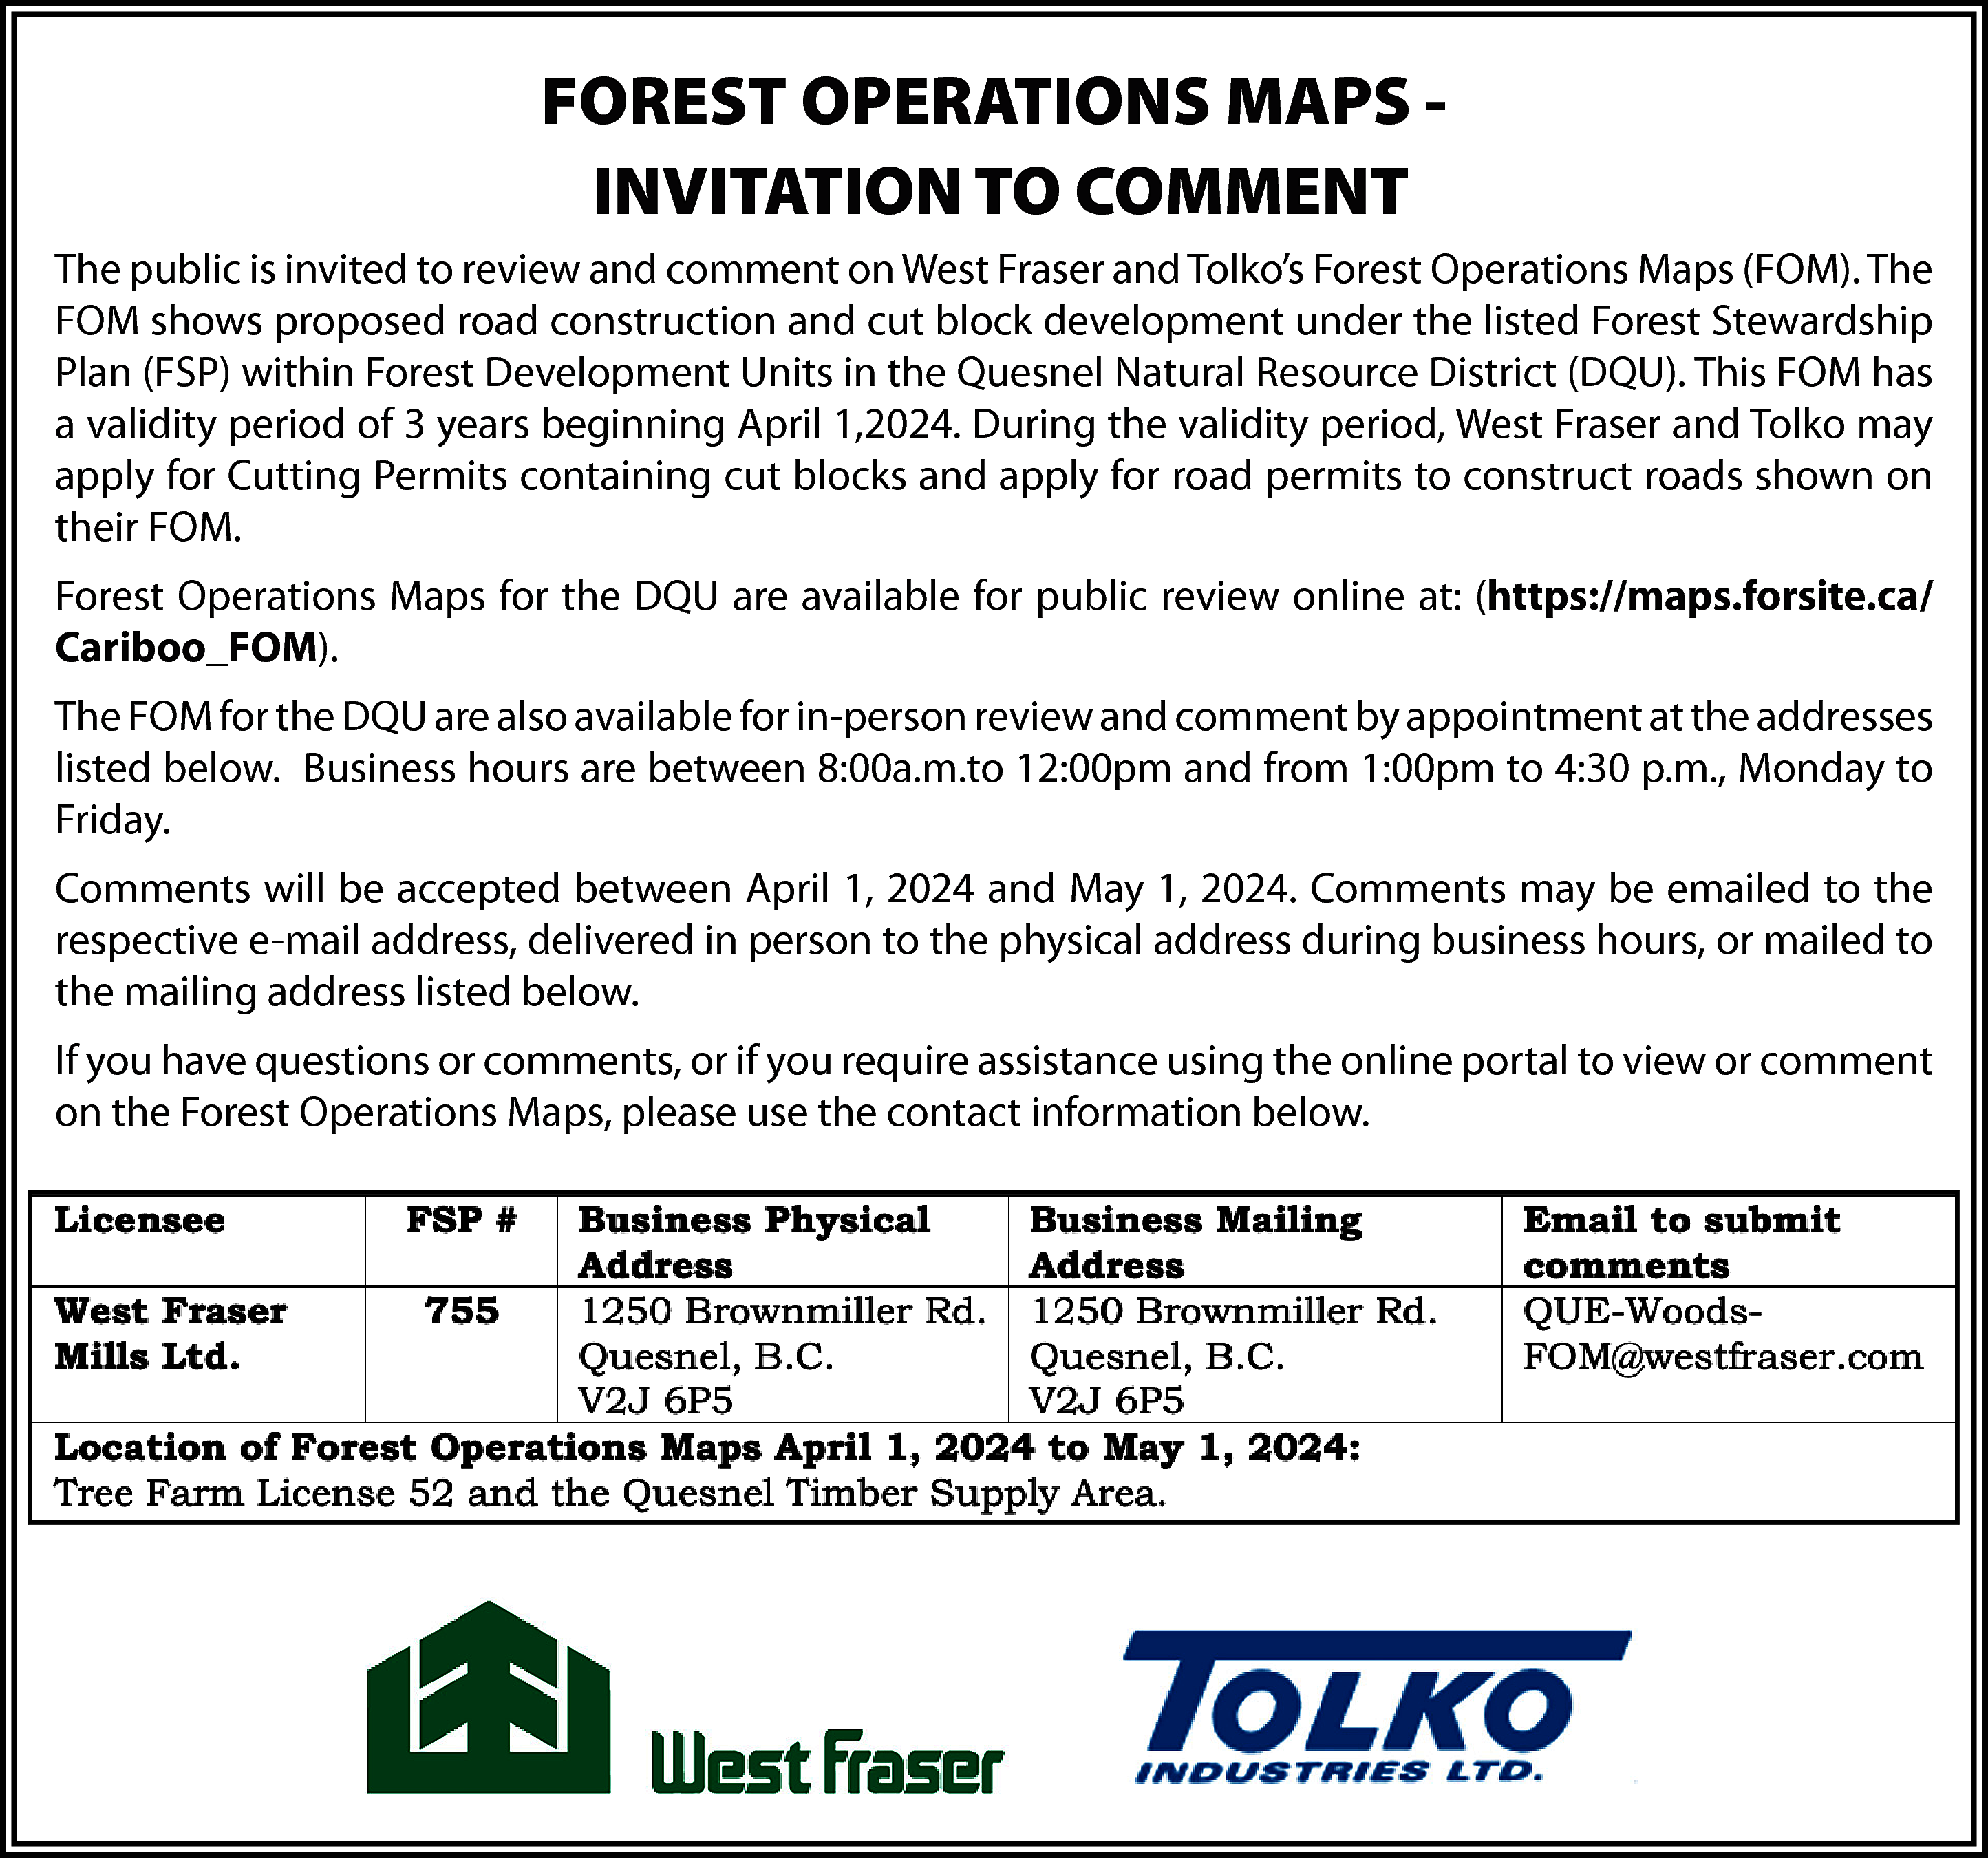 FOREST OPERATIONS MAPS INVITATION TO  FOREST OPERATIONS MAPS INVITATION TO COMMENT  The public is invited to review and comment on West Fraser and Tolko’s Forest Operations Maps (FOM). The  FOM shows proposed road construction and cut block development under the listed Forest Stewardship  Plan (FSP) within Forest Development Units in the Quesnel Natural Resource District (DQU). This FOM has  a validity period of 3 years beginning April 1,2024. During the validity period, West Fraser and Tolko may  apply for Cutting Permits containing cut blocks and apply for road permits to construct roads shown on  their FOM.  Forest Operations Maps for the DQU are available for public review online at: (https://maps.forsite.ca/  Cariboo_FOM).  The FOM for the DQU are also available for in-person review and comment by appointment at the addresses  listed below. Business hours are between 8:00a.m.to 12:00pm and from 1:00pm to 4:30 p.m., Monday to  Friday.  Comments will be accepted between April 1, 2024 and May 1, 2024. Comments may be emailed to the  respective e-mail address, delivered in person to the physical address during business hours, or mailed to  the mailing address listed below.  If you have questions or comments, or if you require assistance using the online portal to view or comment  on the Forest Operations Maps, please use the contact information below.    